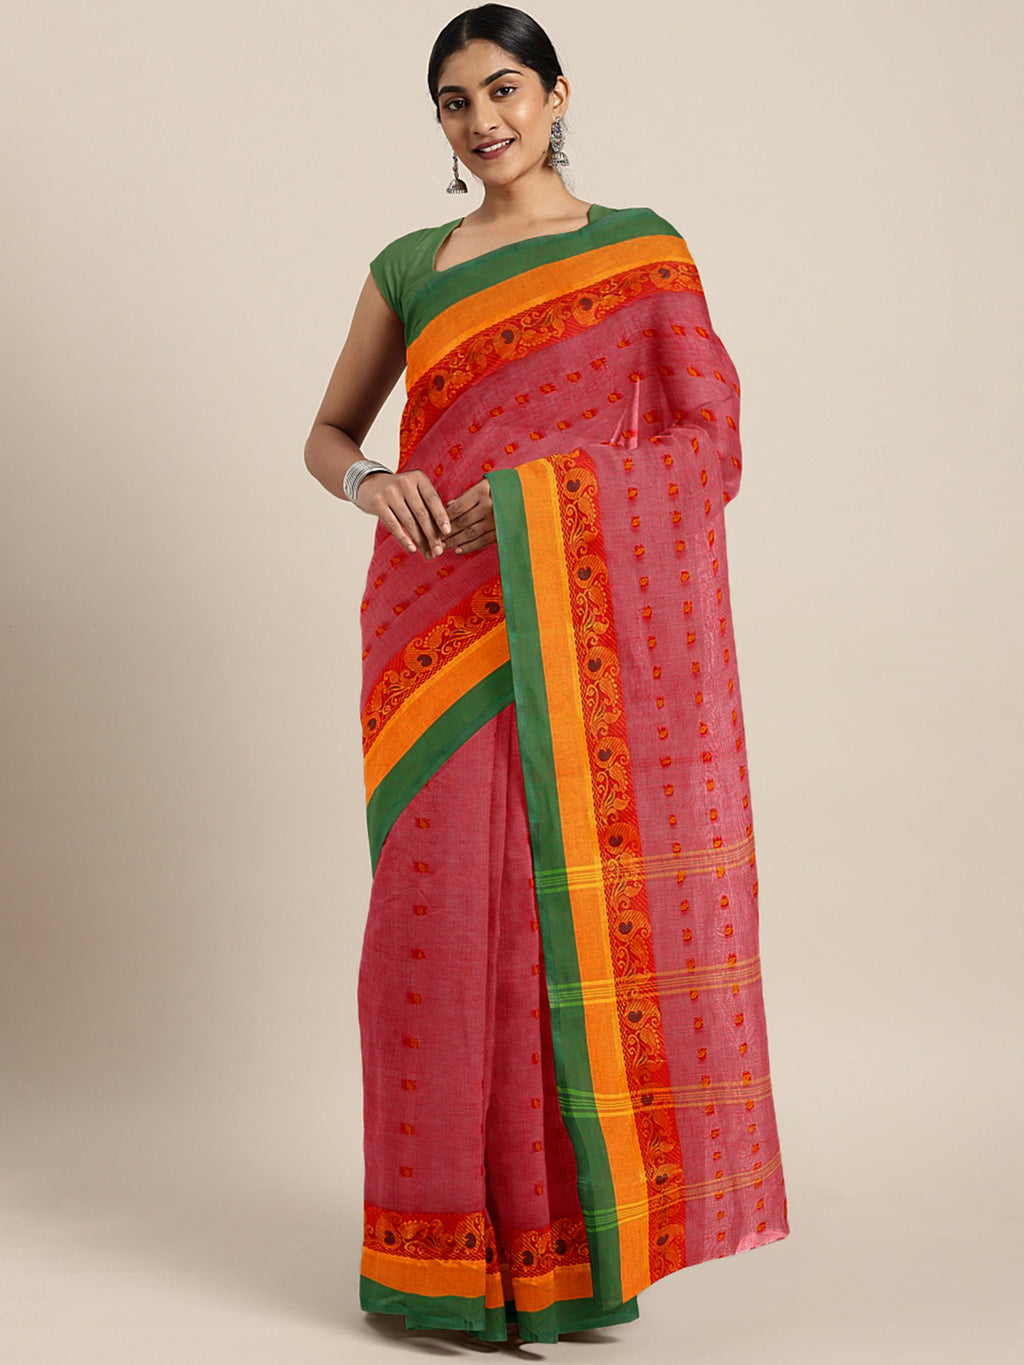 Red Tant Woven Design Saree Without Blouse Piece DUTASA050 DUTASA050-Saree-Kalakari India-DUTASA050-Geographical Indication, Hand Crafted, Heritage Prints, Natural Dyes, Sarees, Silk Cotton, Sustainable Fabrics, Taant, Tant, West Bengal, Woven-[Linen,Ethnic,wear,Fashionista,Handloom,Handicraft,Indigo,blockprint,block,print,Cotton,Chanderi,Blue, latest,classy,party,bollywood,trendy,summer,style,traditional,formal,elegant,unique,style,hand,block,print, dabu,booti,gift,present,glamorous,affordable,